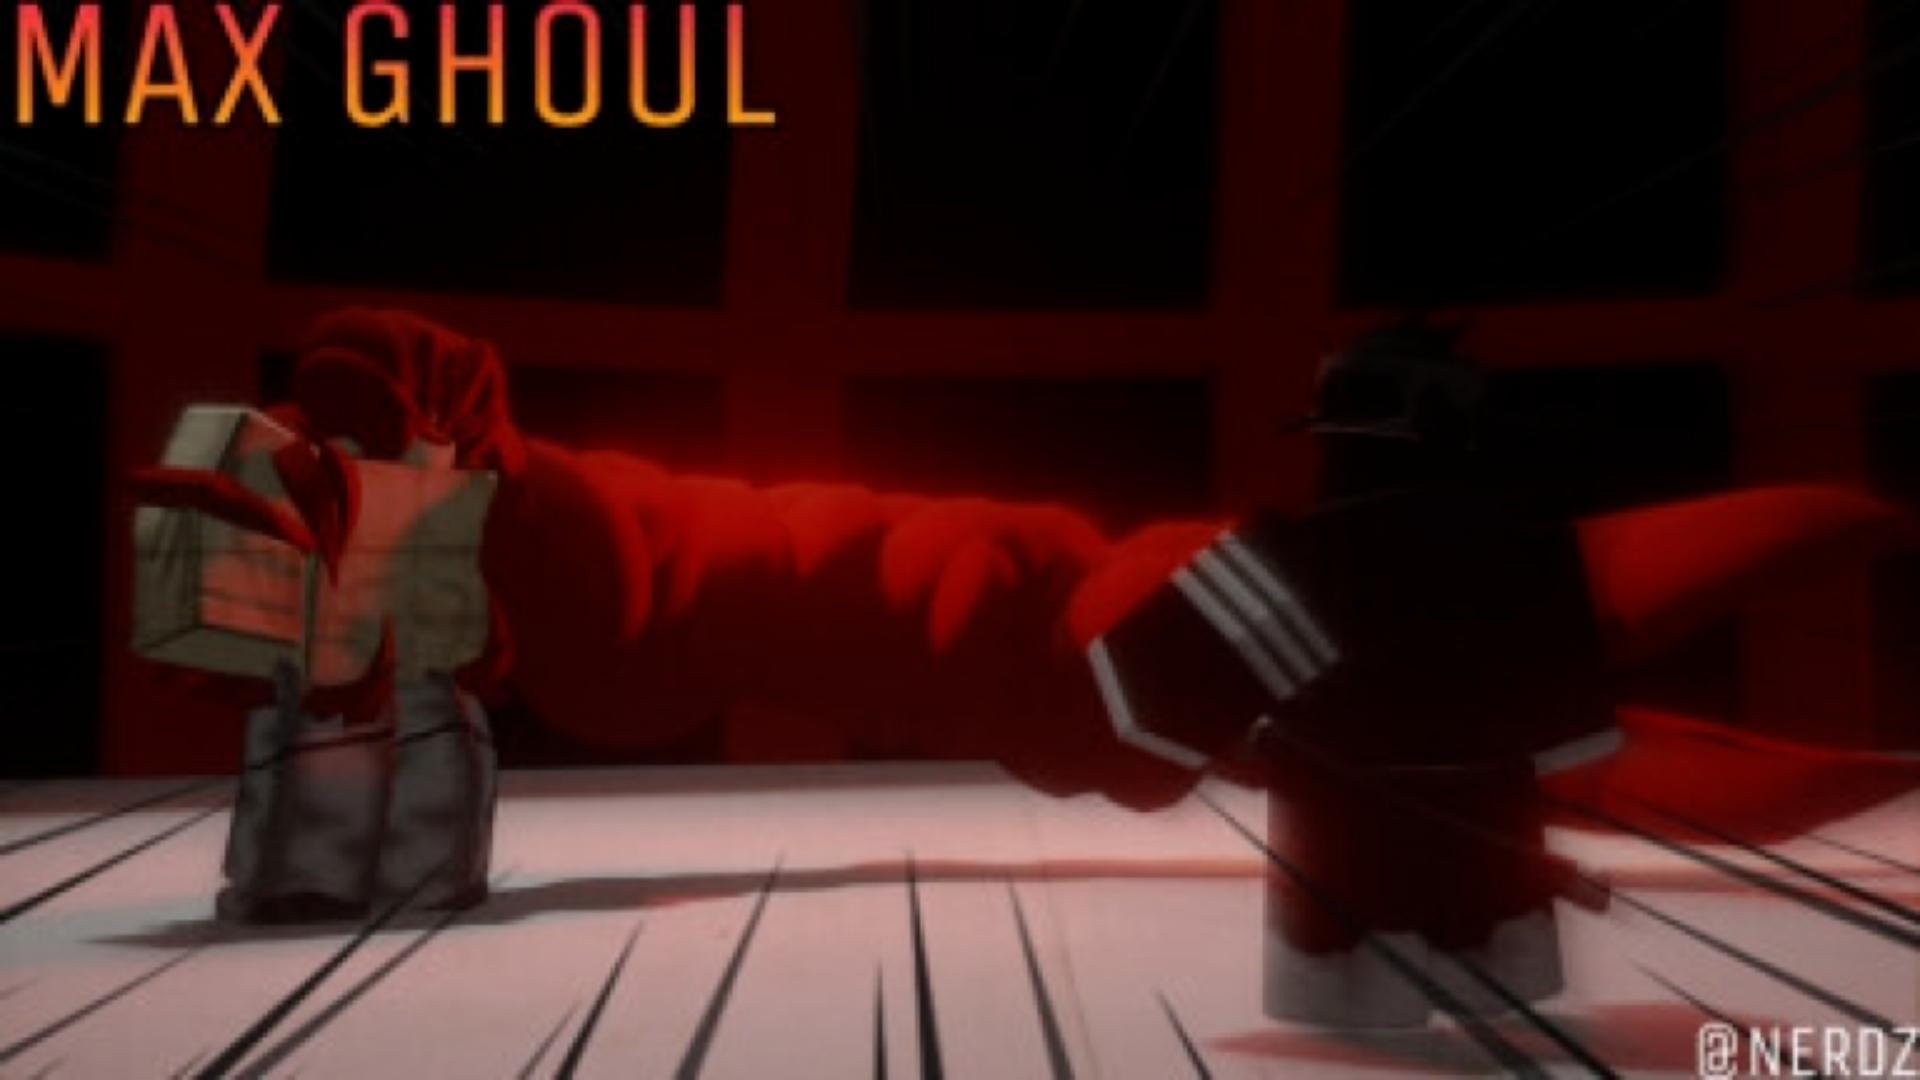 Roblox Project Ghoul Codes (December 2022)